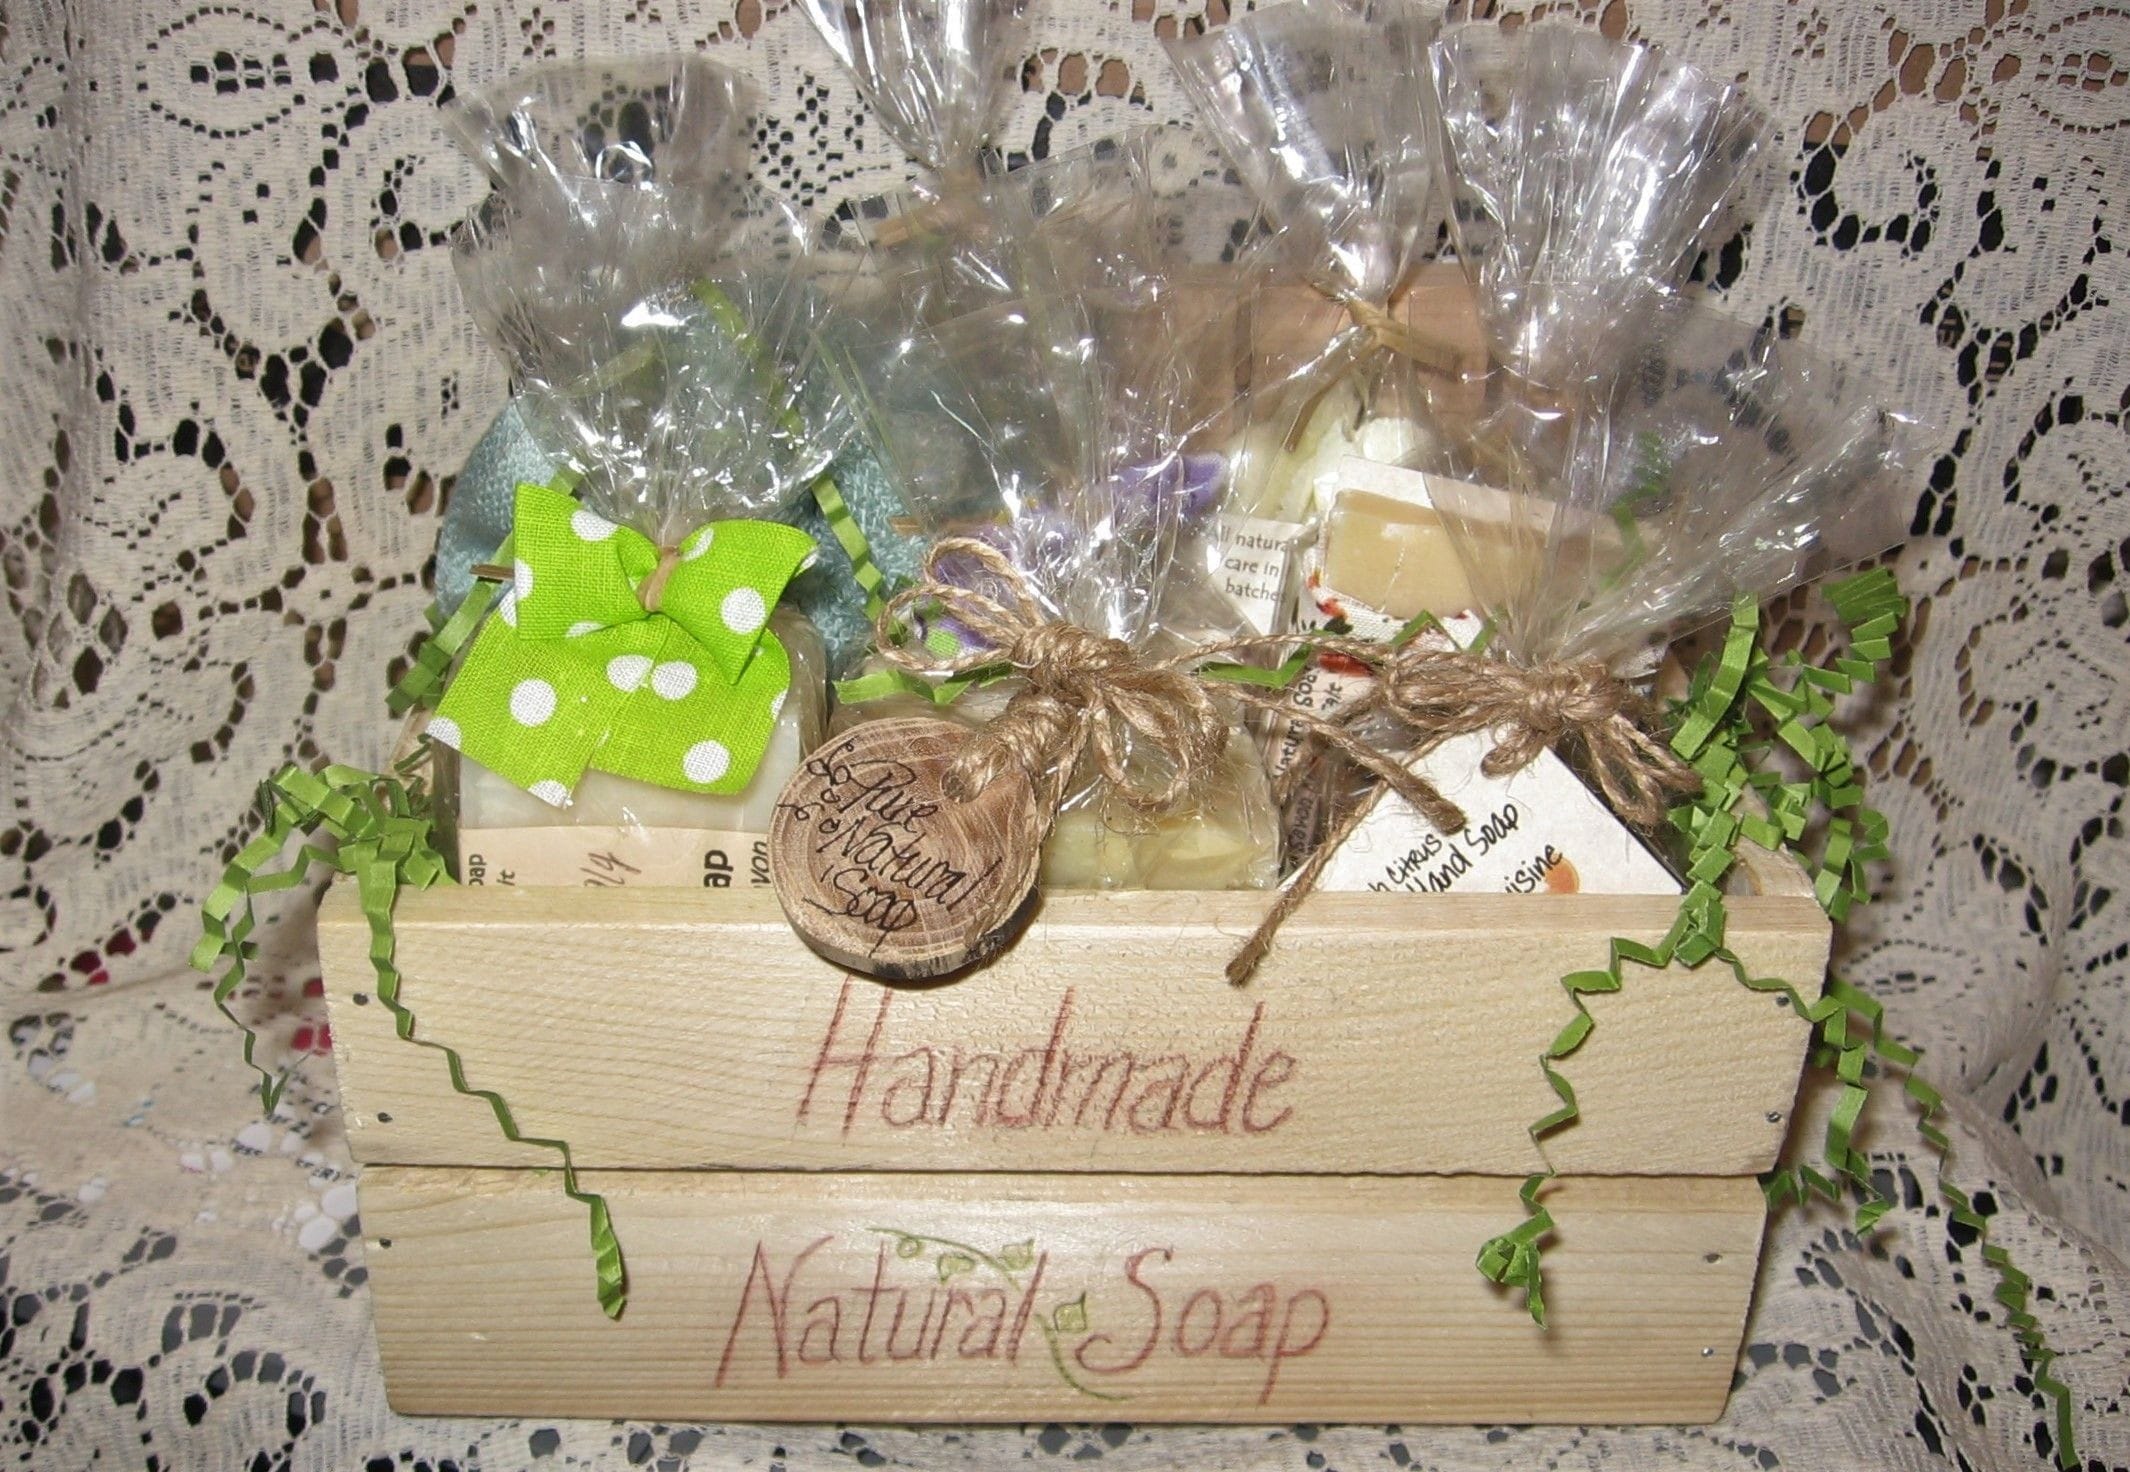 Our wooden crate collections make a lovely gift for when you need something special.  Great prices, generous collections of all natural products, handmade.